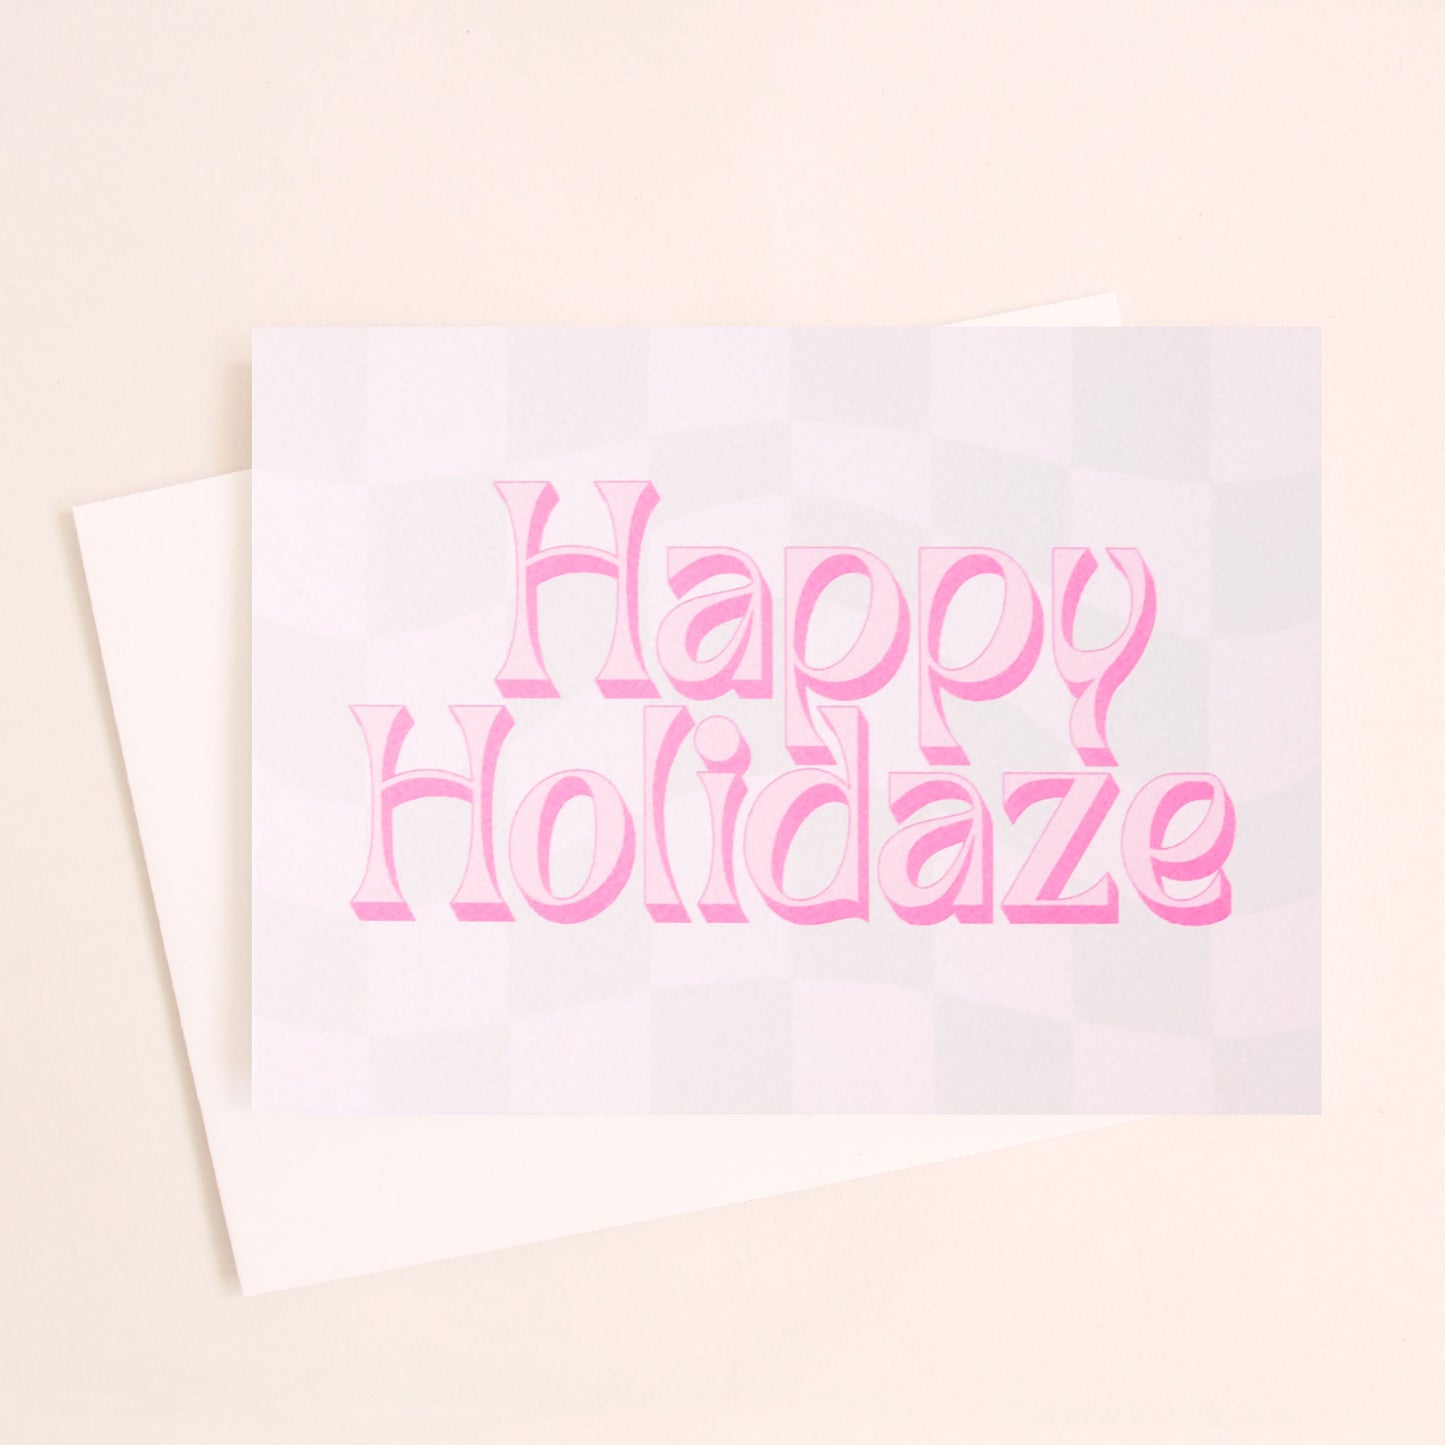 Pale mint and cream checkered card that reads 'Happy Holiday' in retro pink lettering with thin magenta shadow. The card is accompanied by a solid white envelope. 